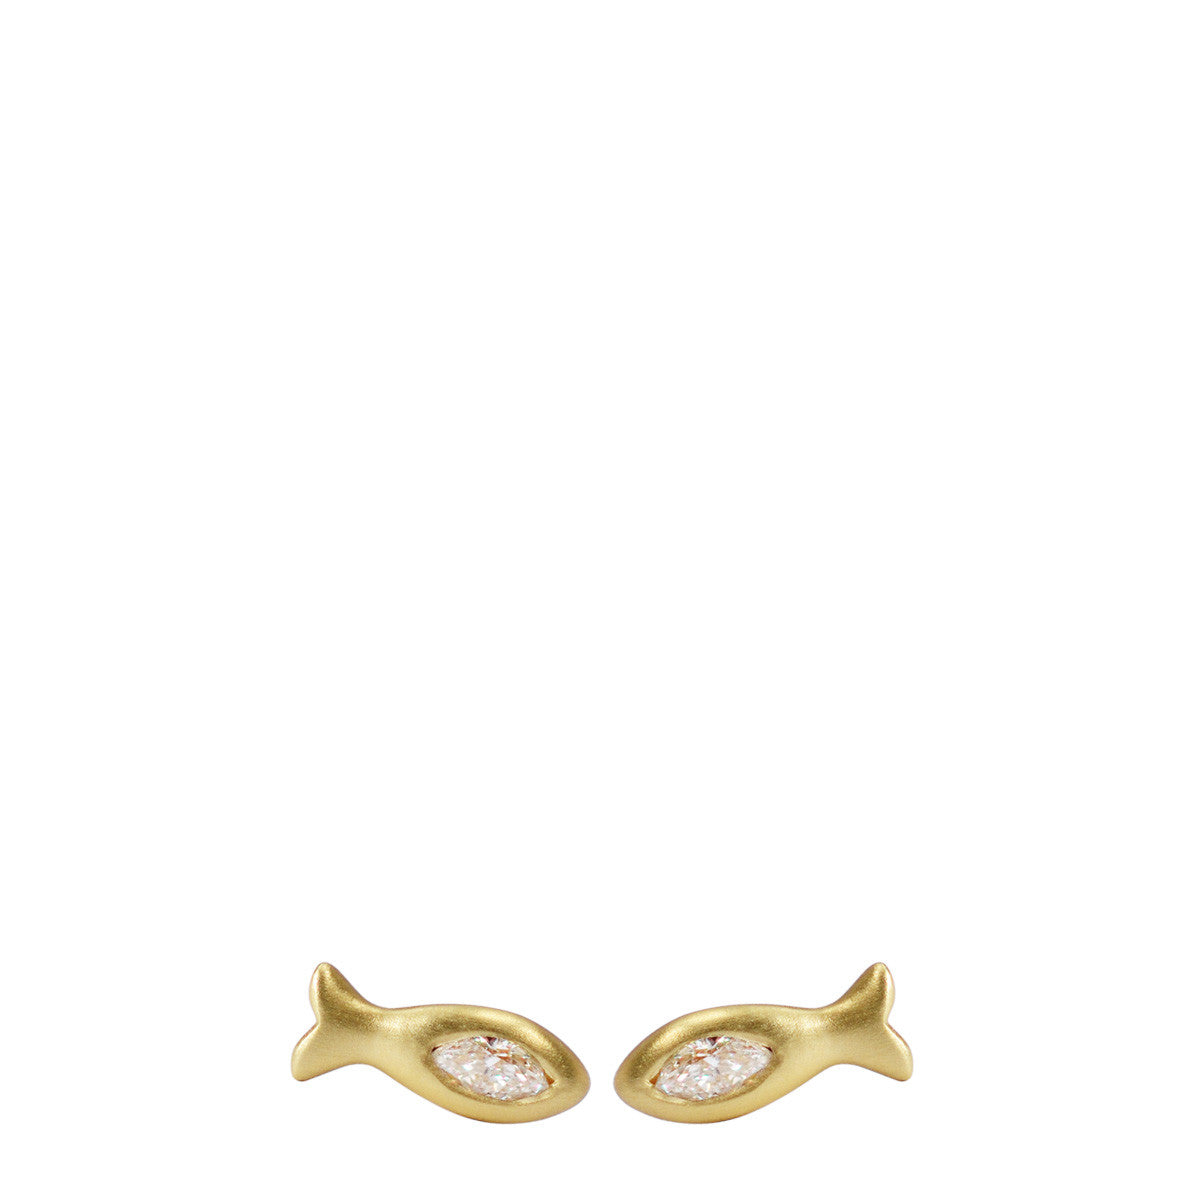 18K Gold Fish Stud Earrings with Marquise Diamonds